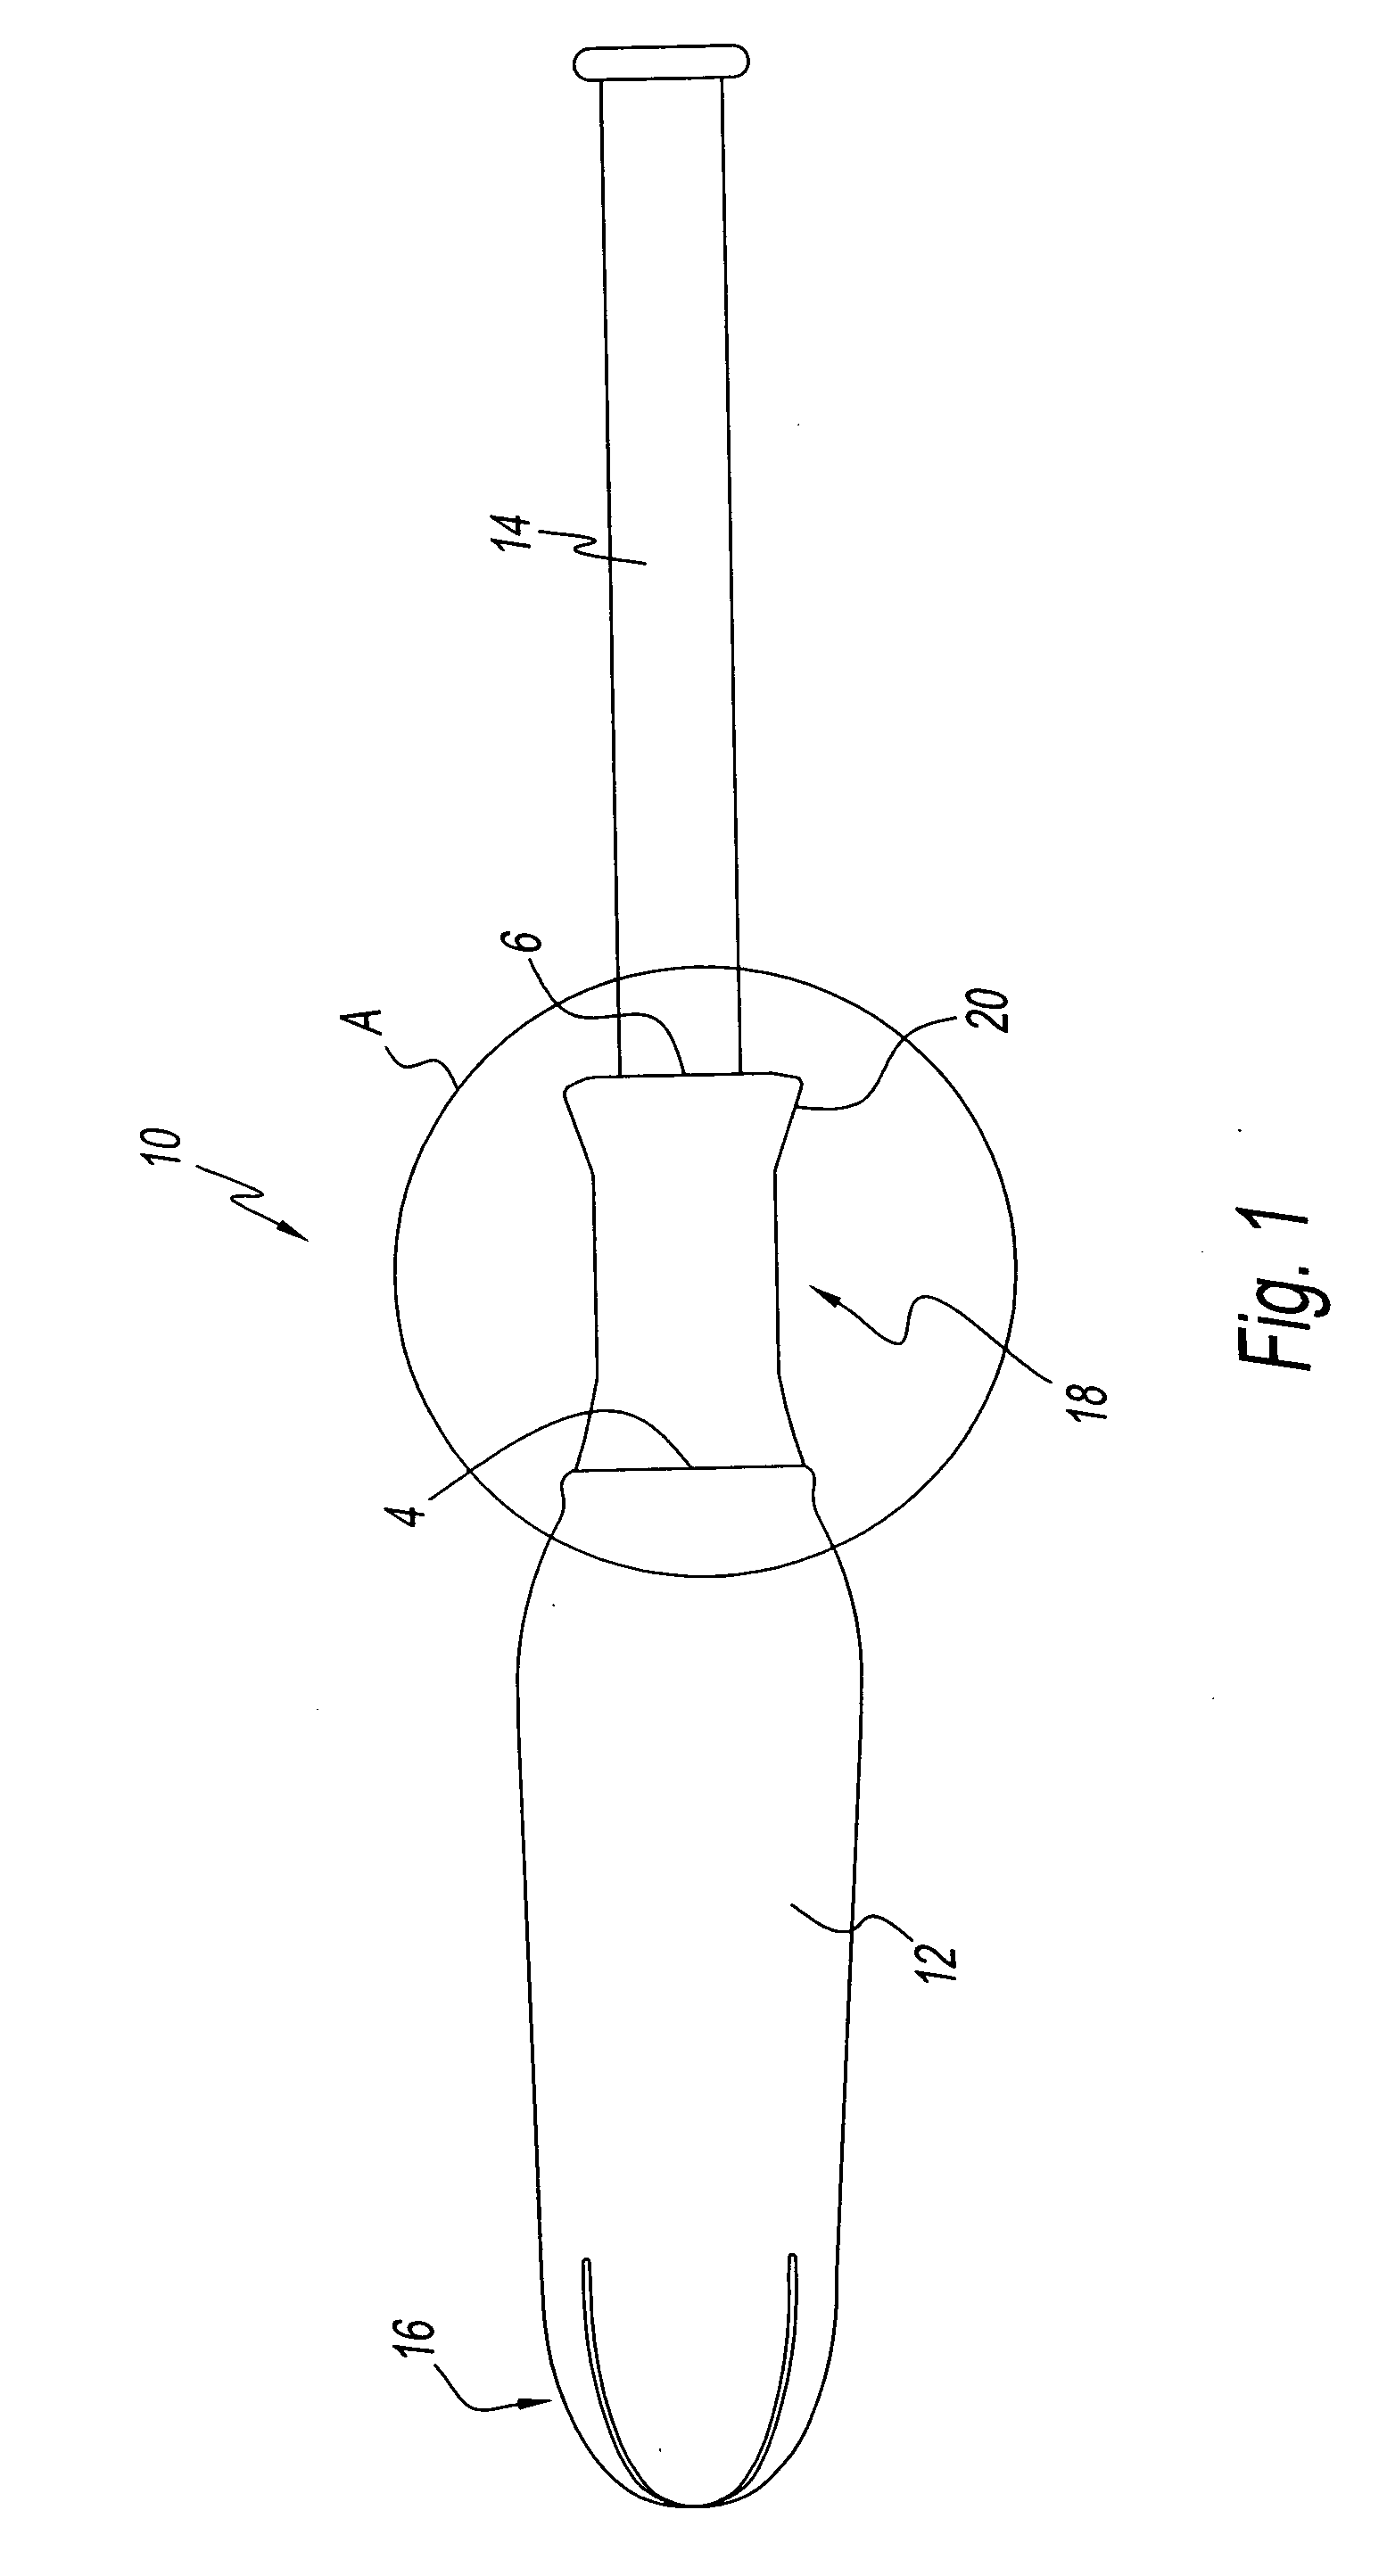 Tampon insertion device for improved control and pledget placement